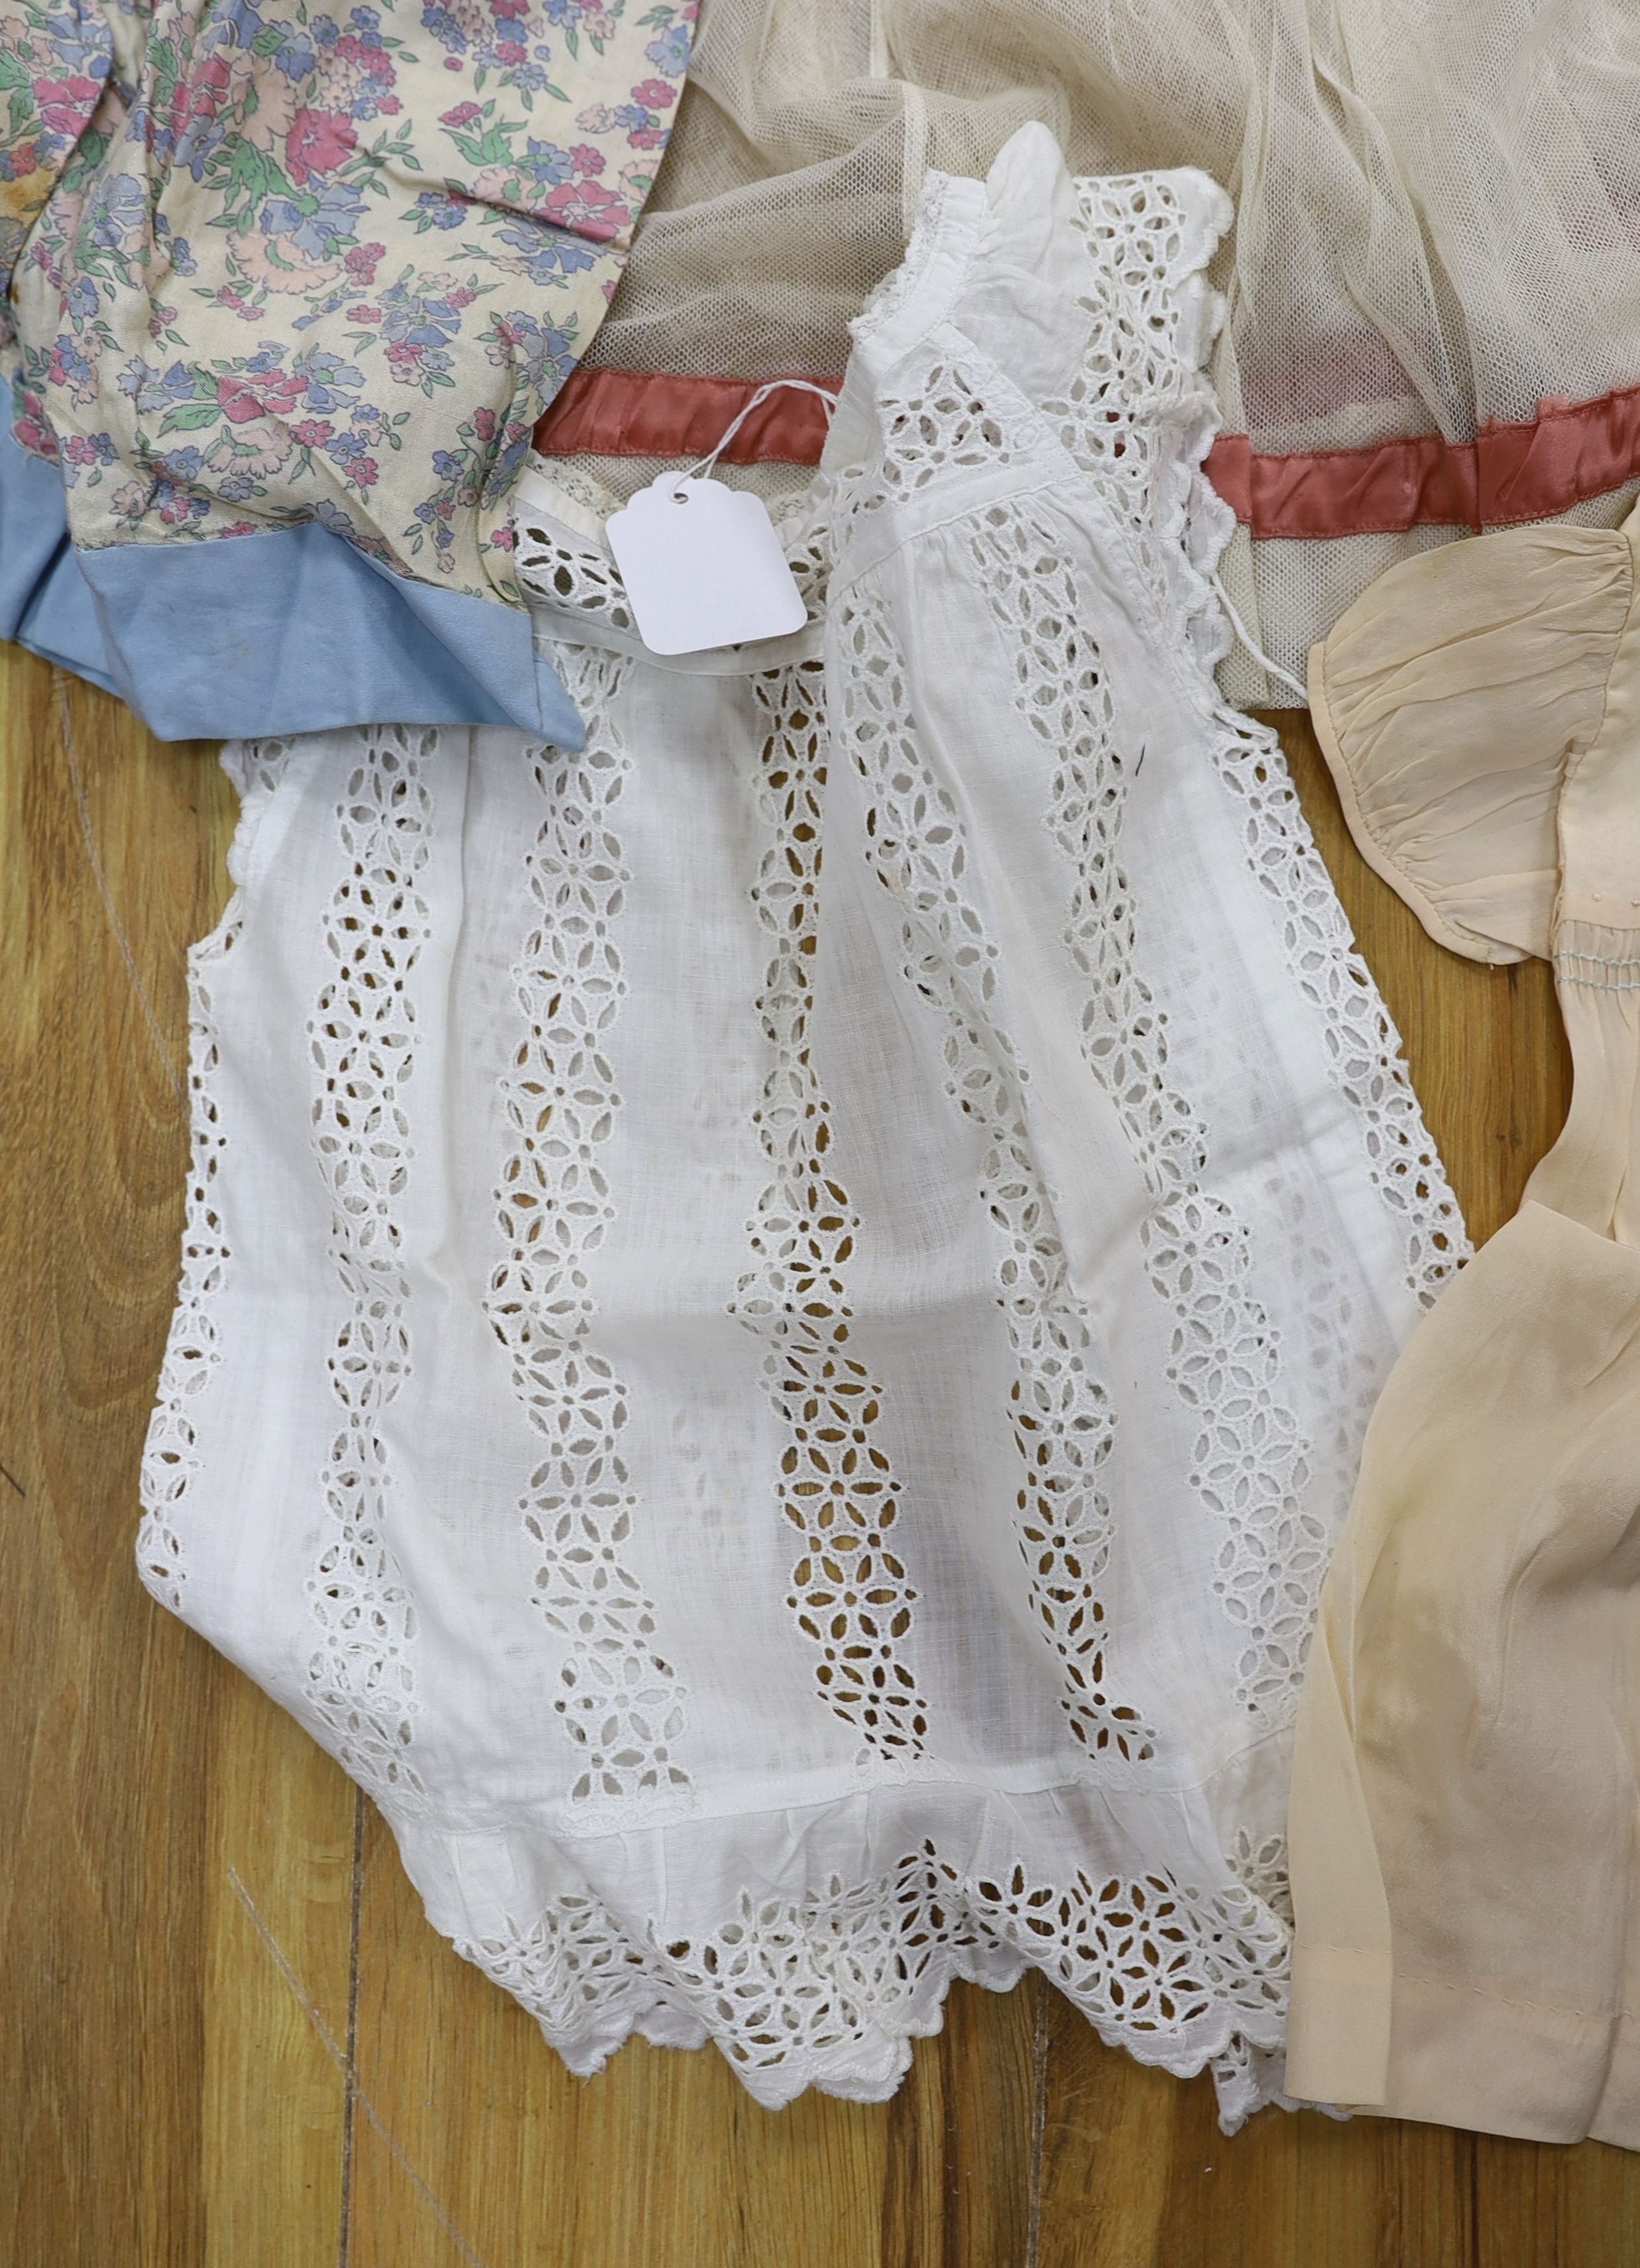 A collection of 19th century and later baby wear